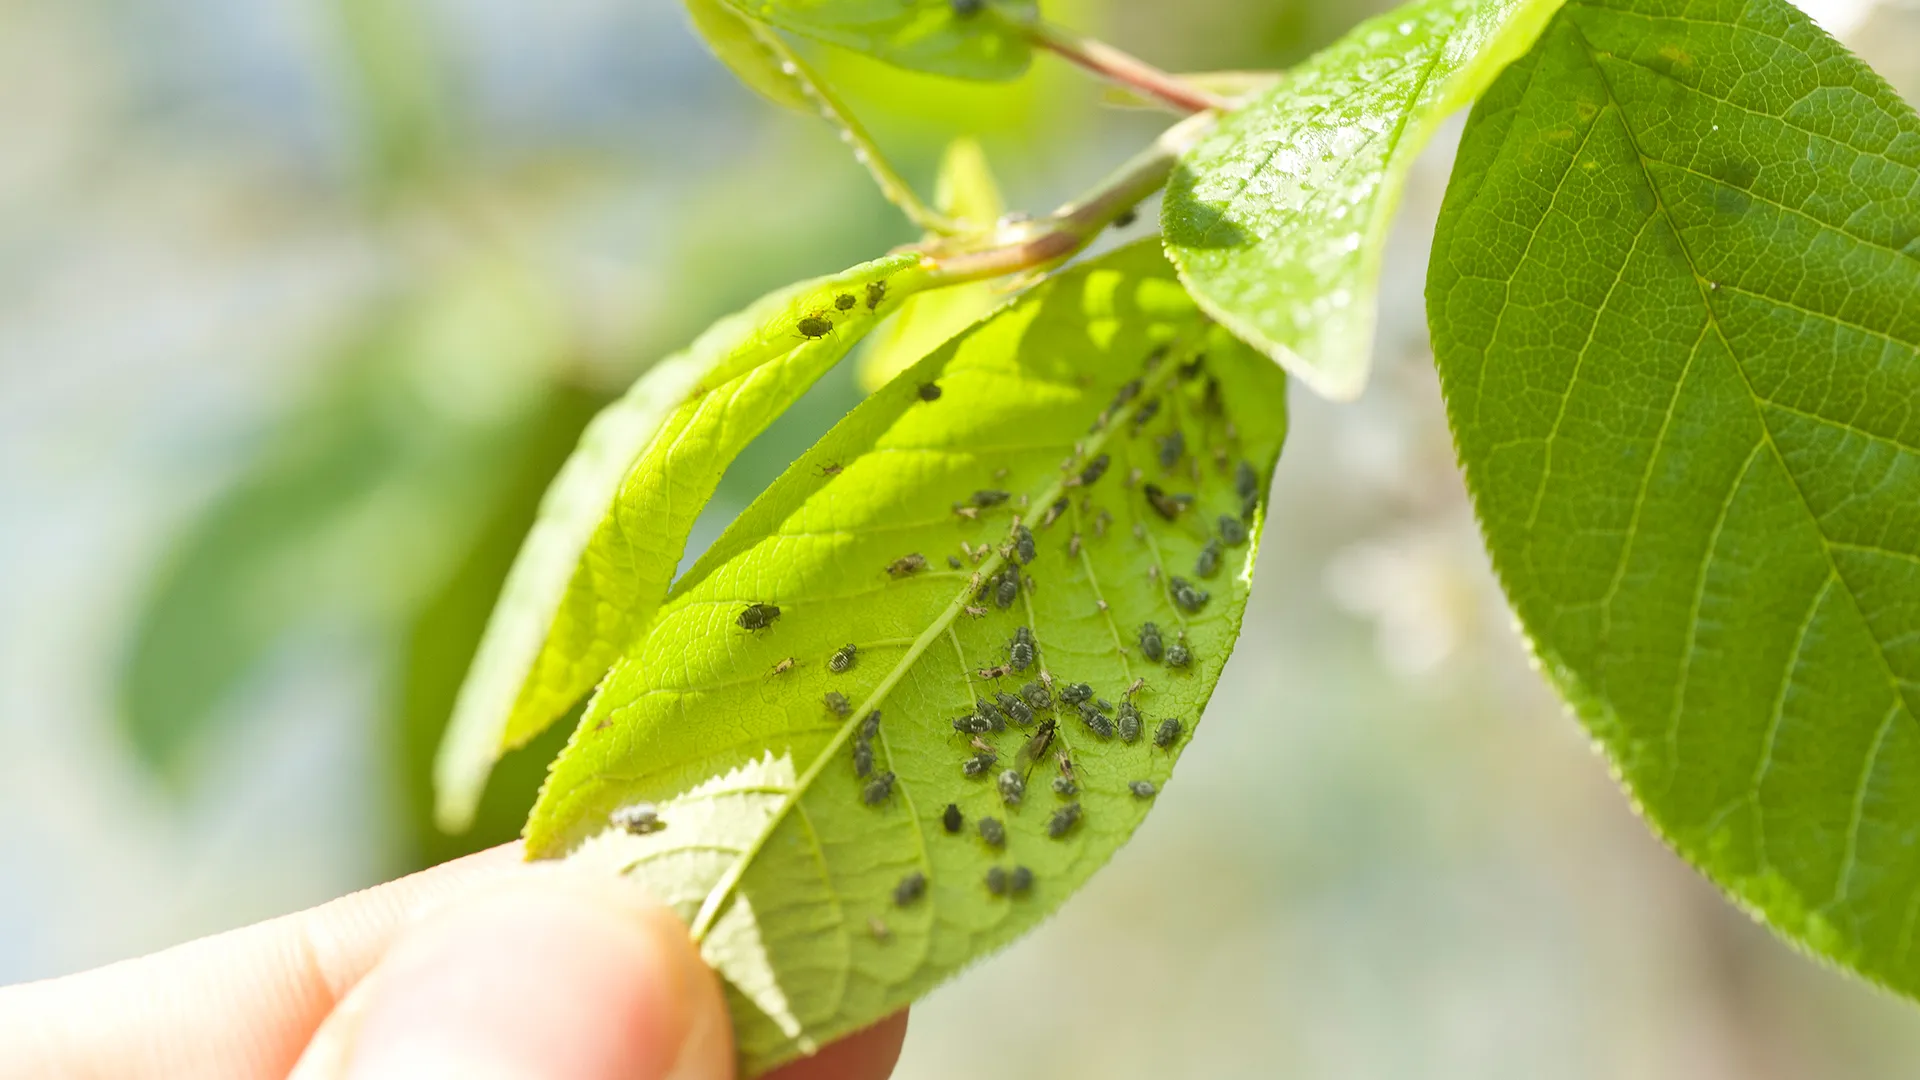 Identifying Disease and Pests